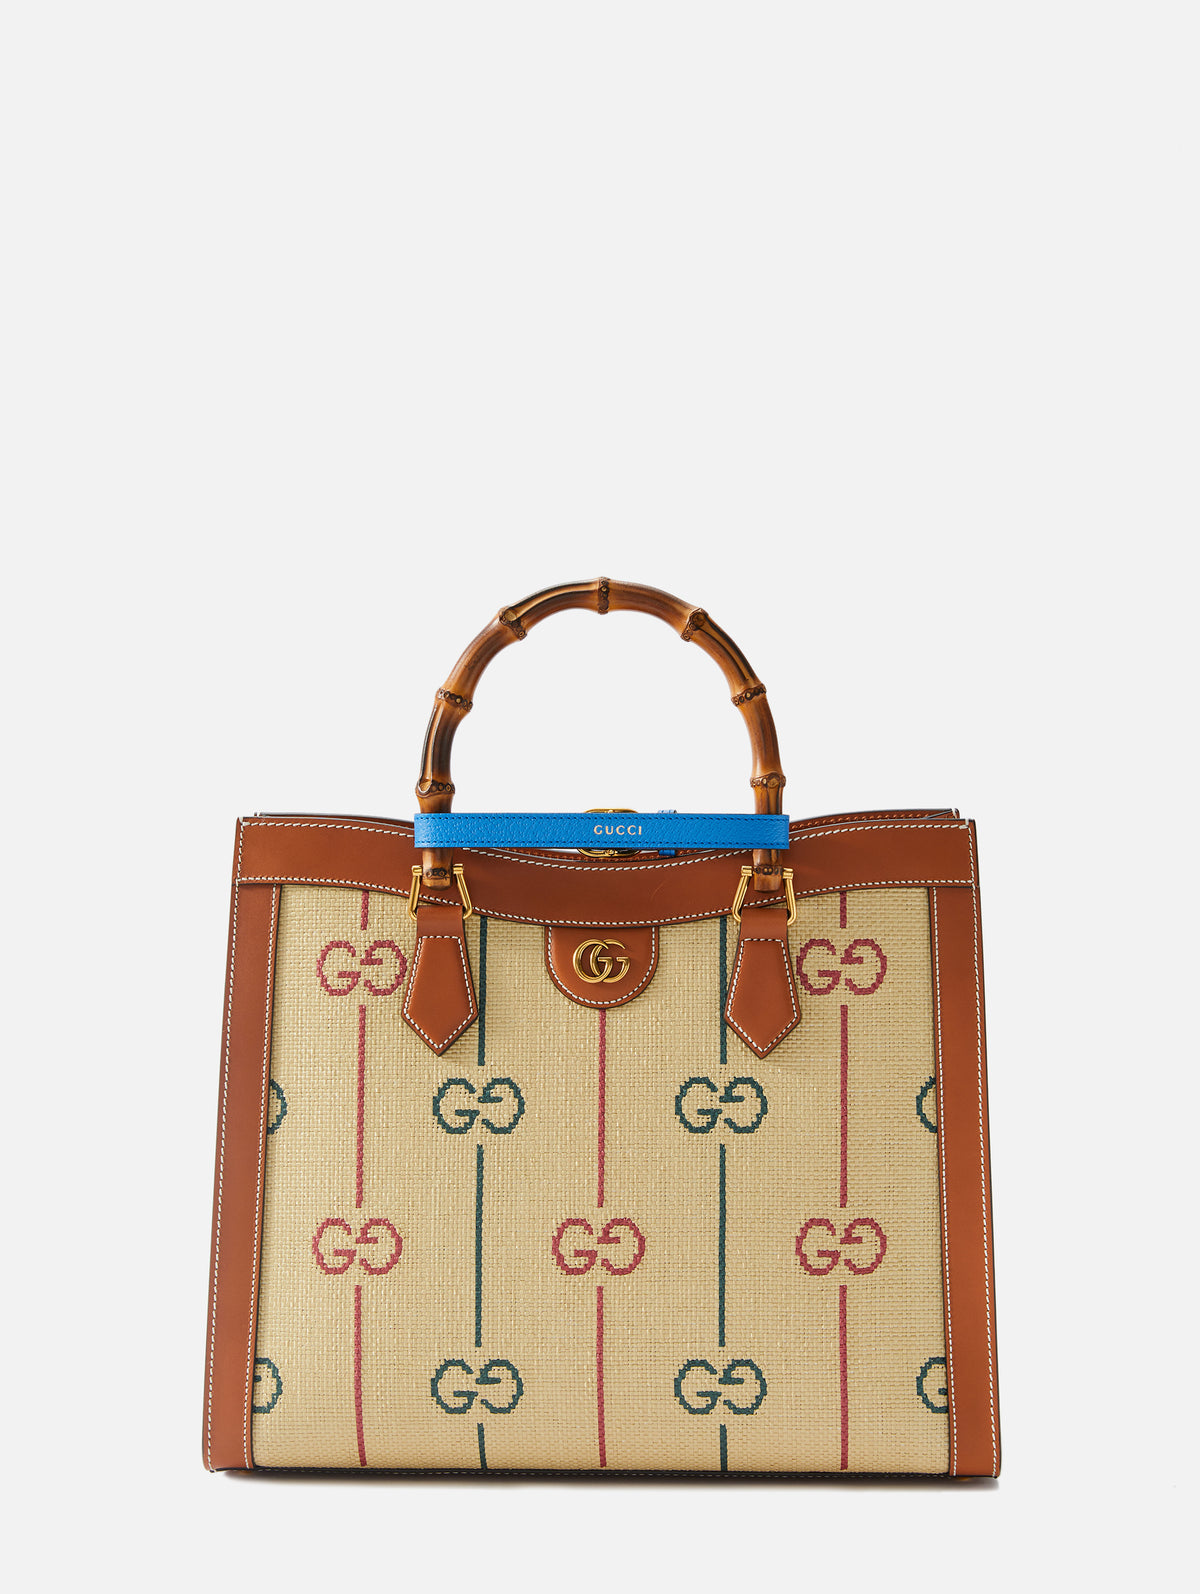 Gucci Large Vintage Canvas Tote in Natural